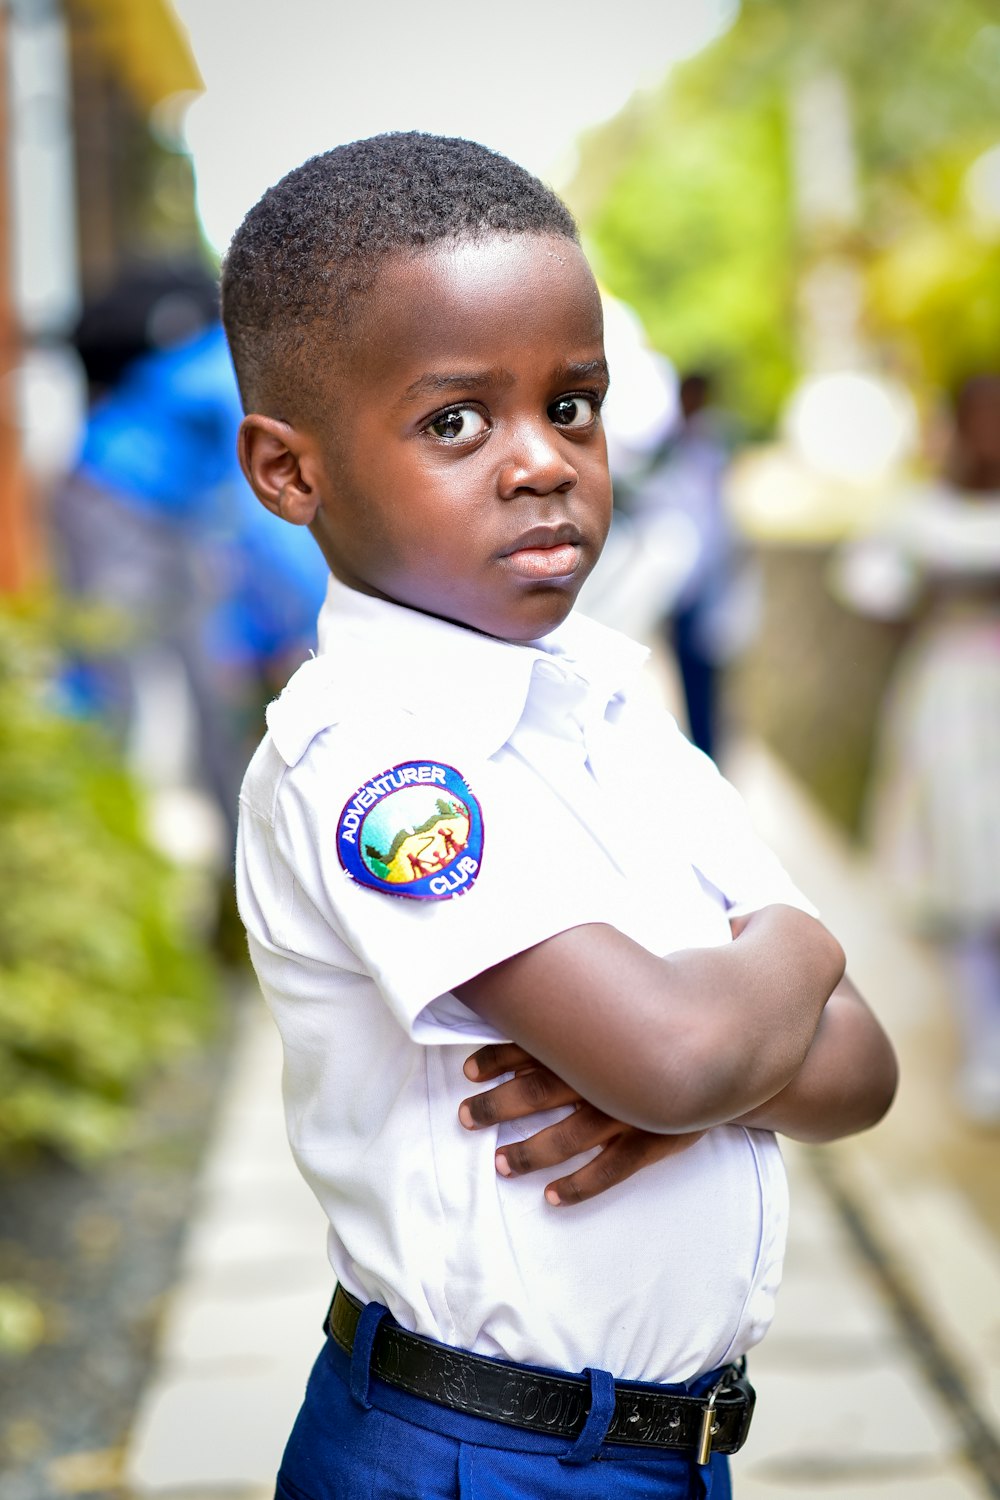 a young boy in a uniform is posing for a picture